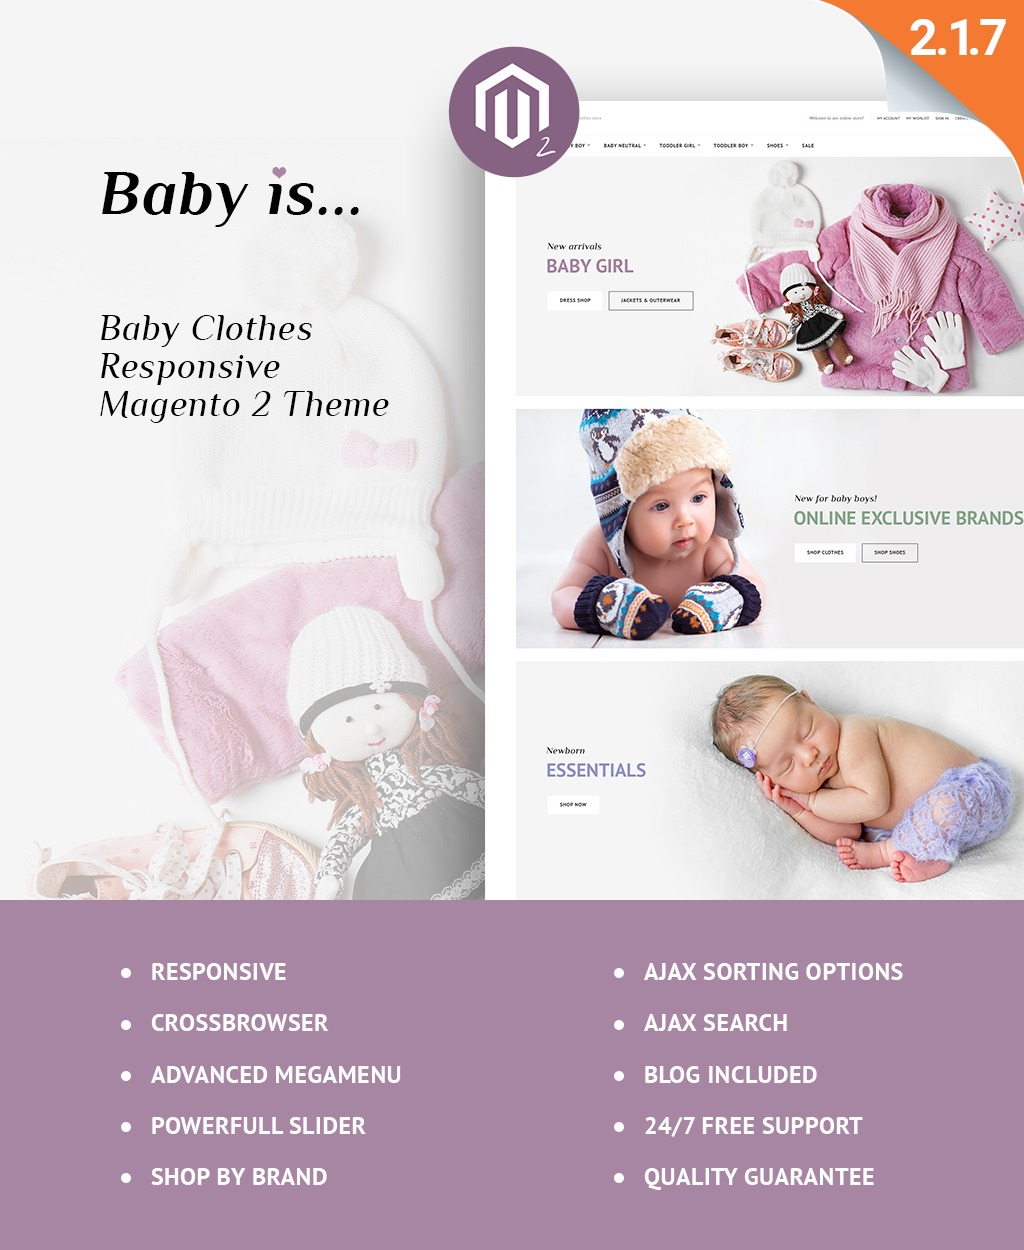 Babyis - Baby Clothes Store Responsive Magento Theme